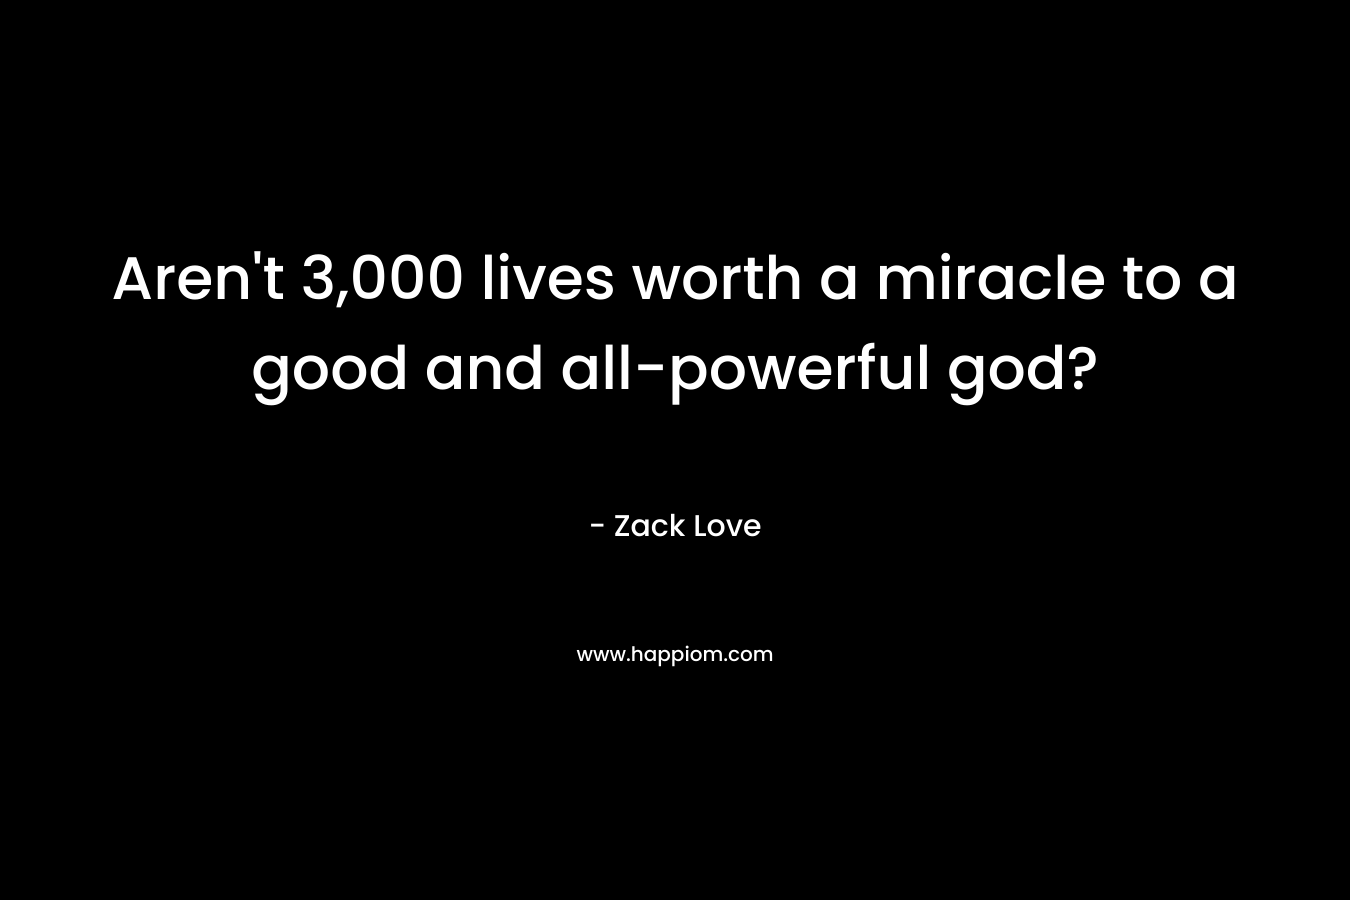 Aren’t 3,000 lives worth a miracle to a good and all-powerful god? – Zack Love